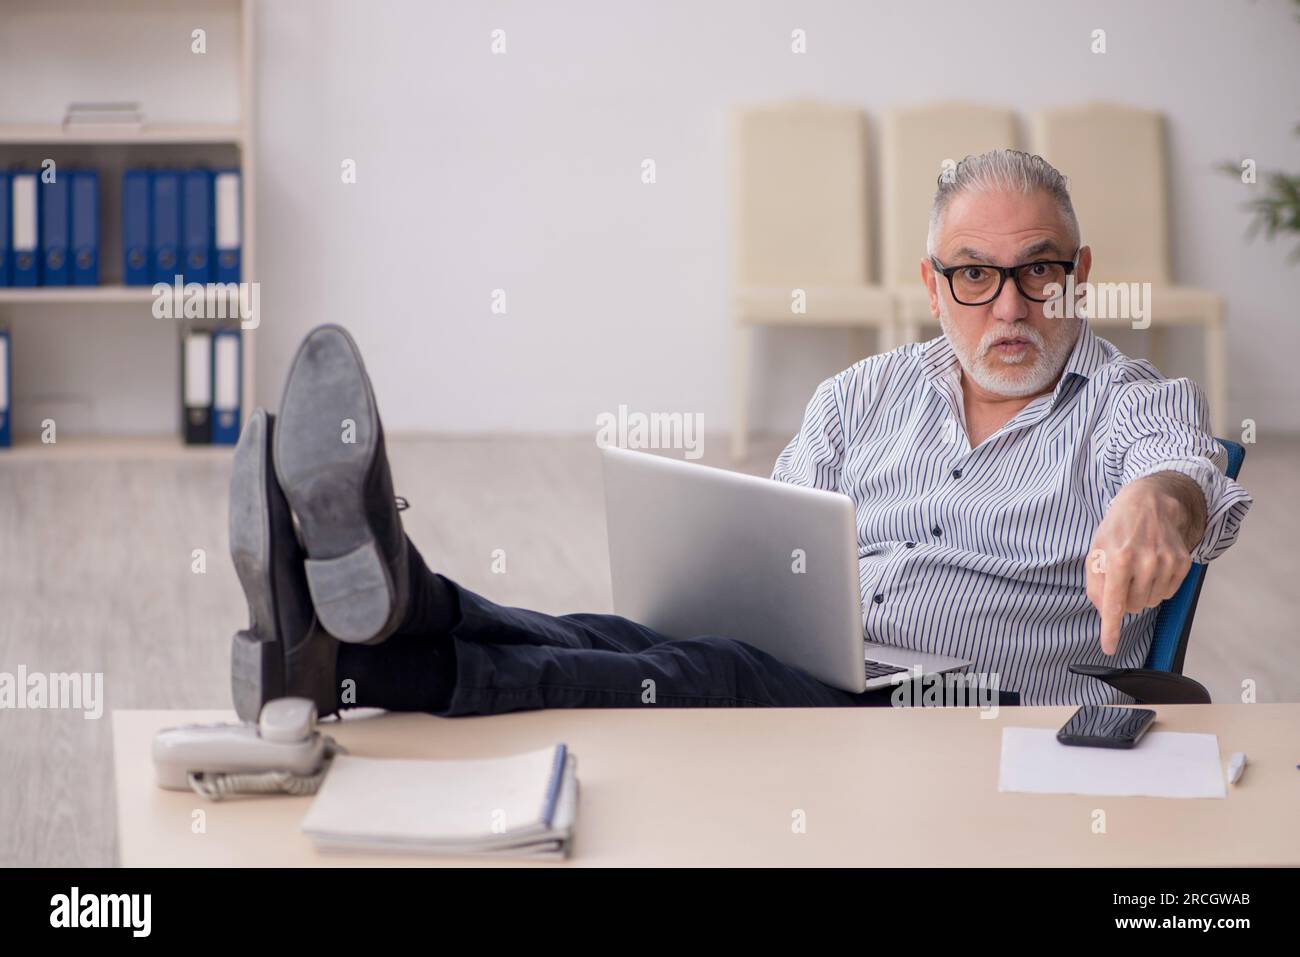 Old employee working at workplace Stock Photo